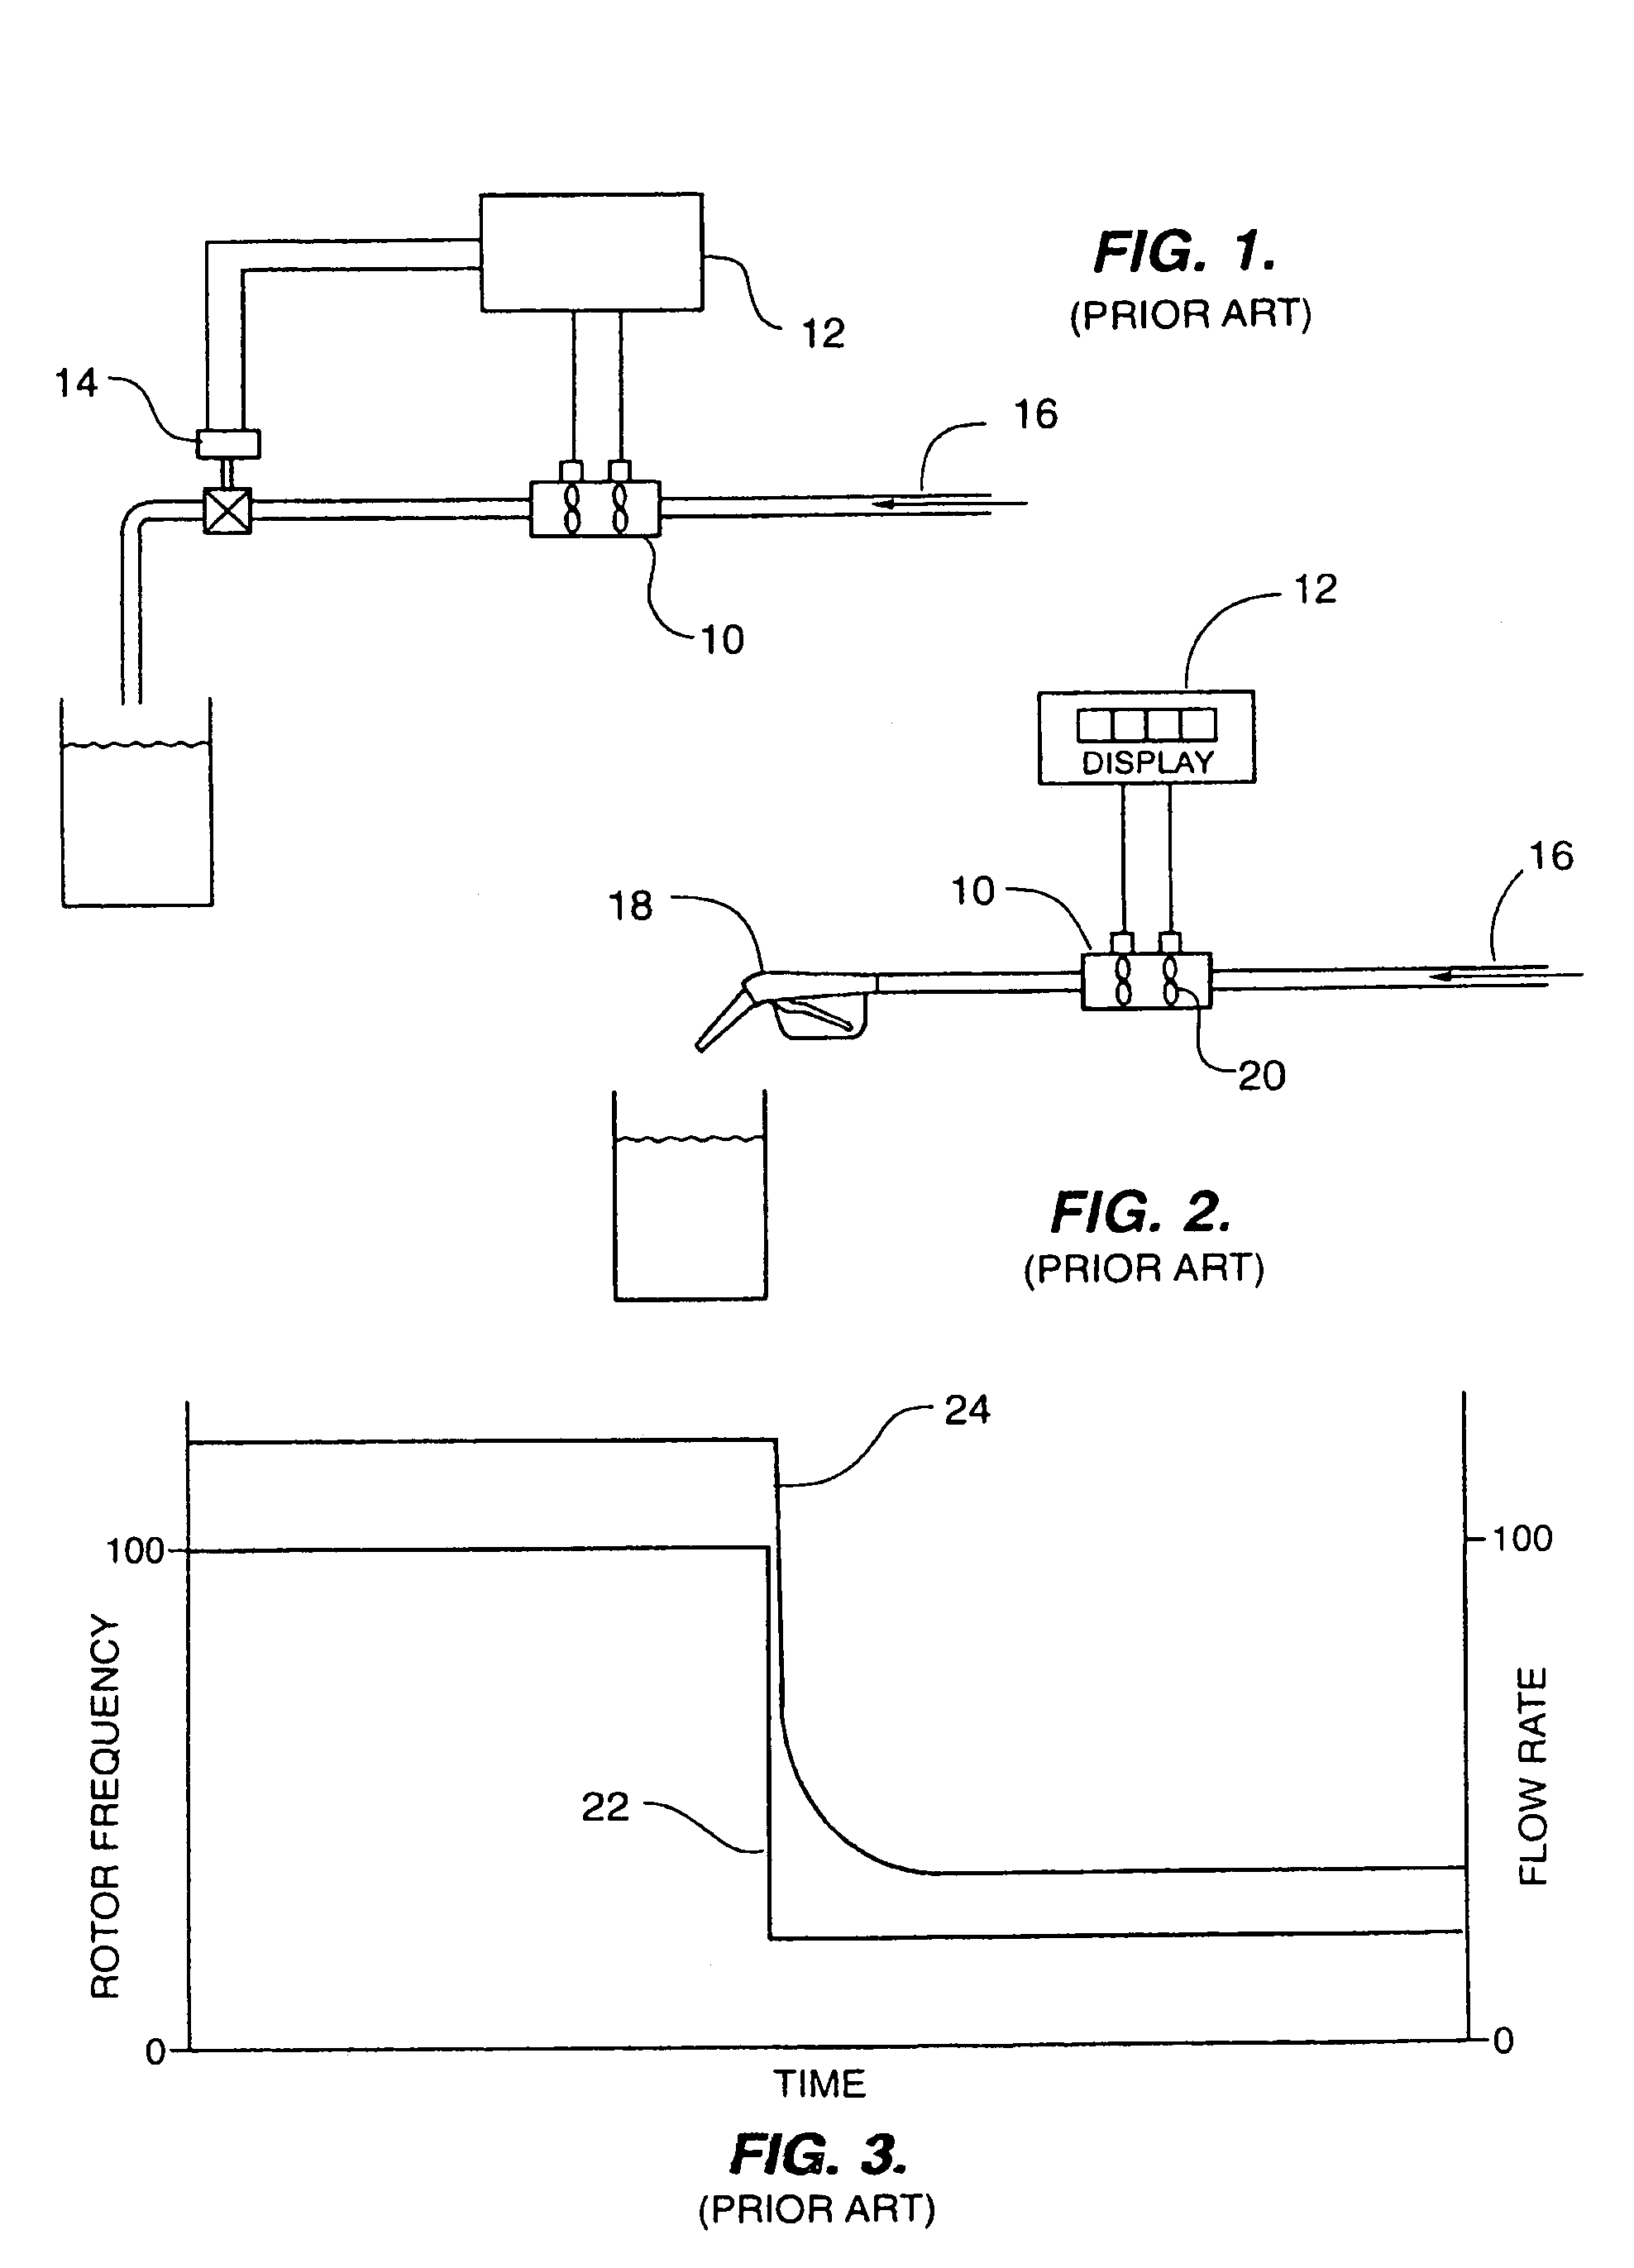 Method for determining and correcting for turbine meter overspin at the instantaneous stoppage of flow rate